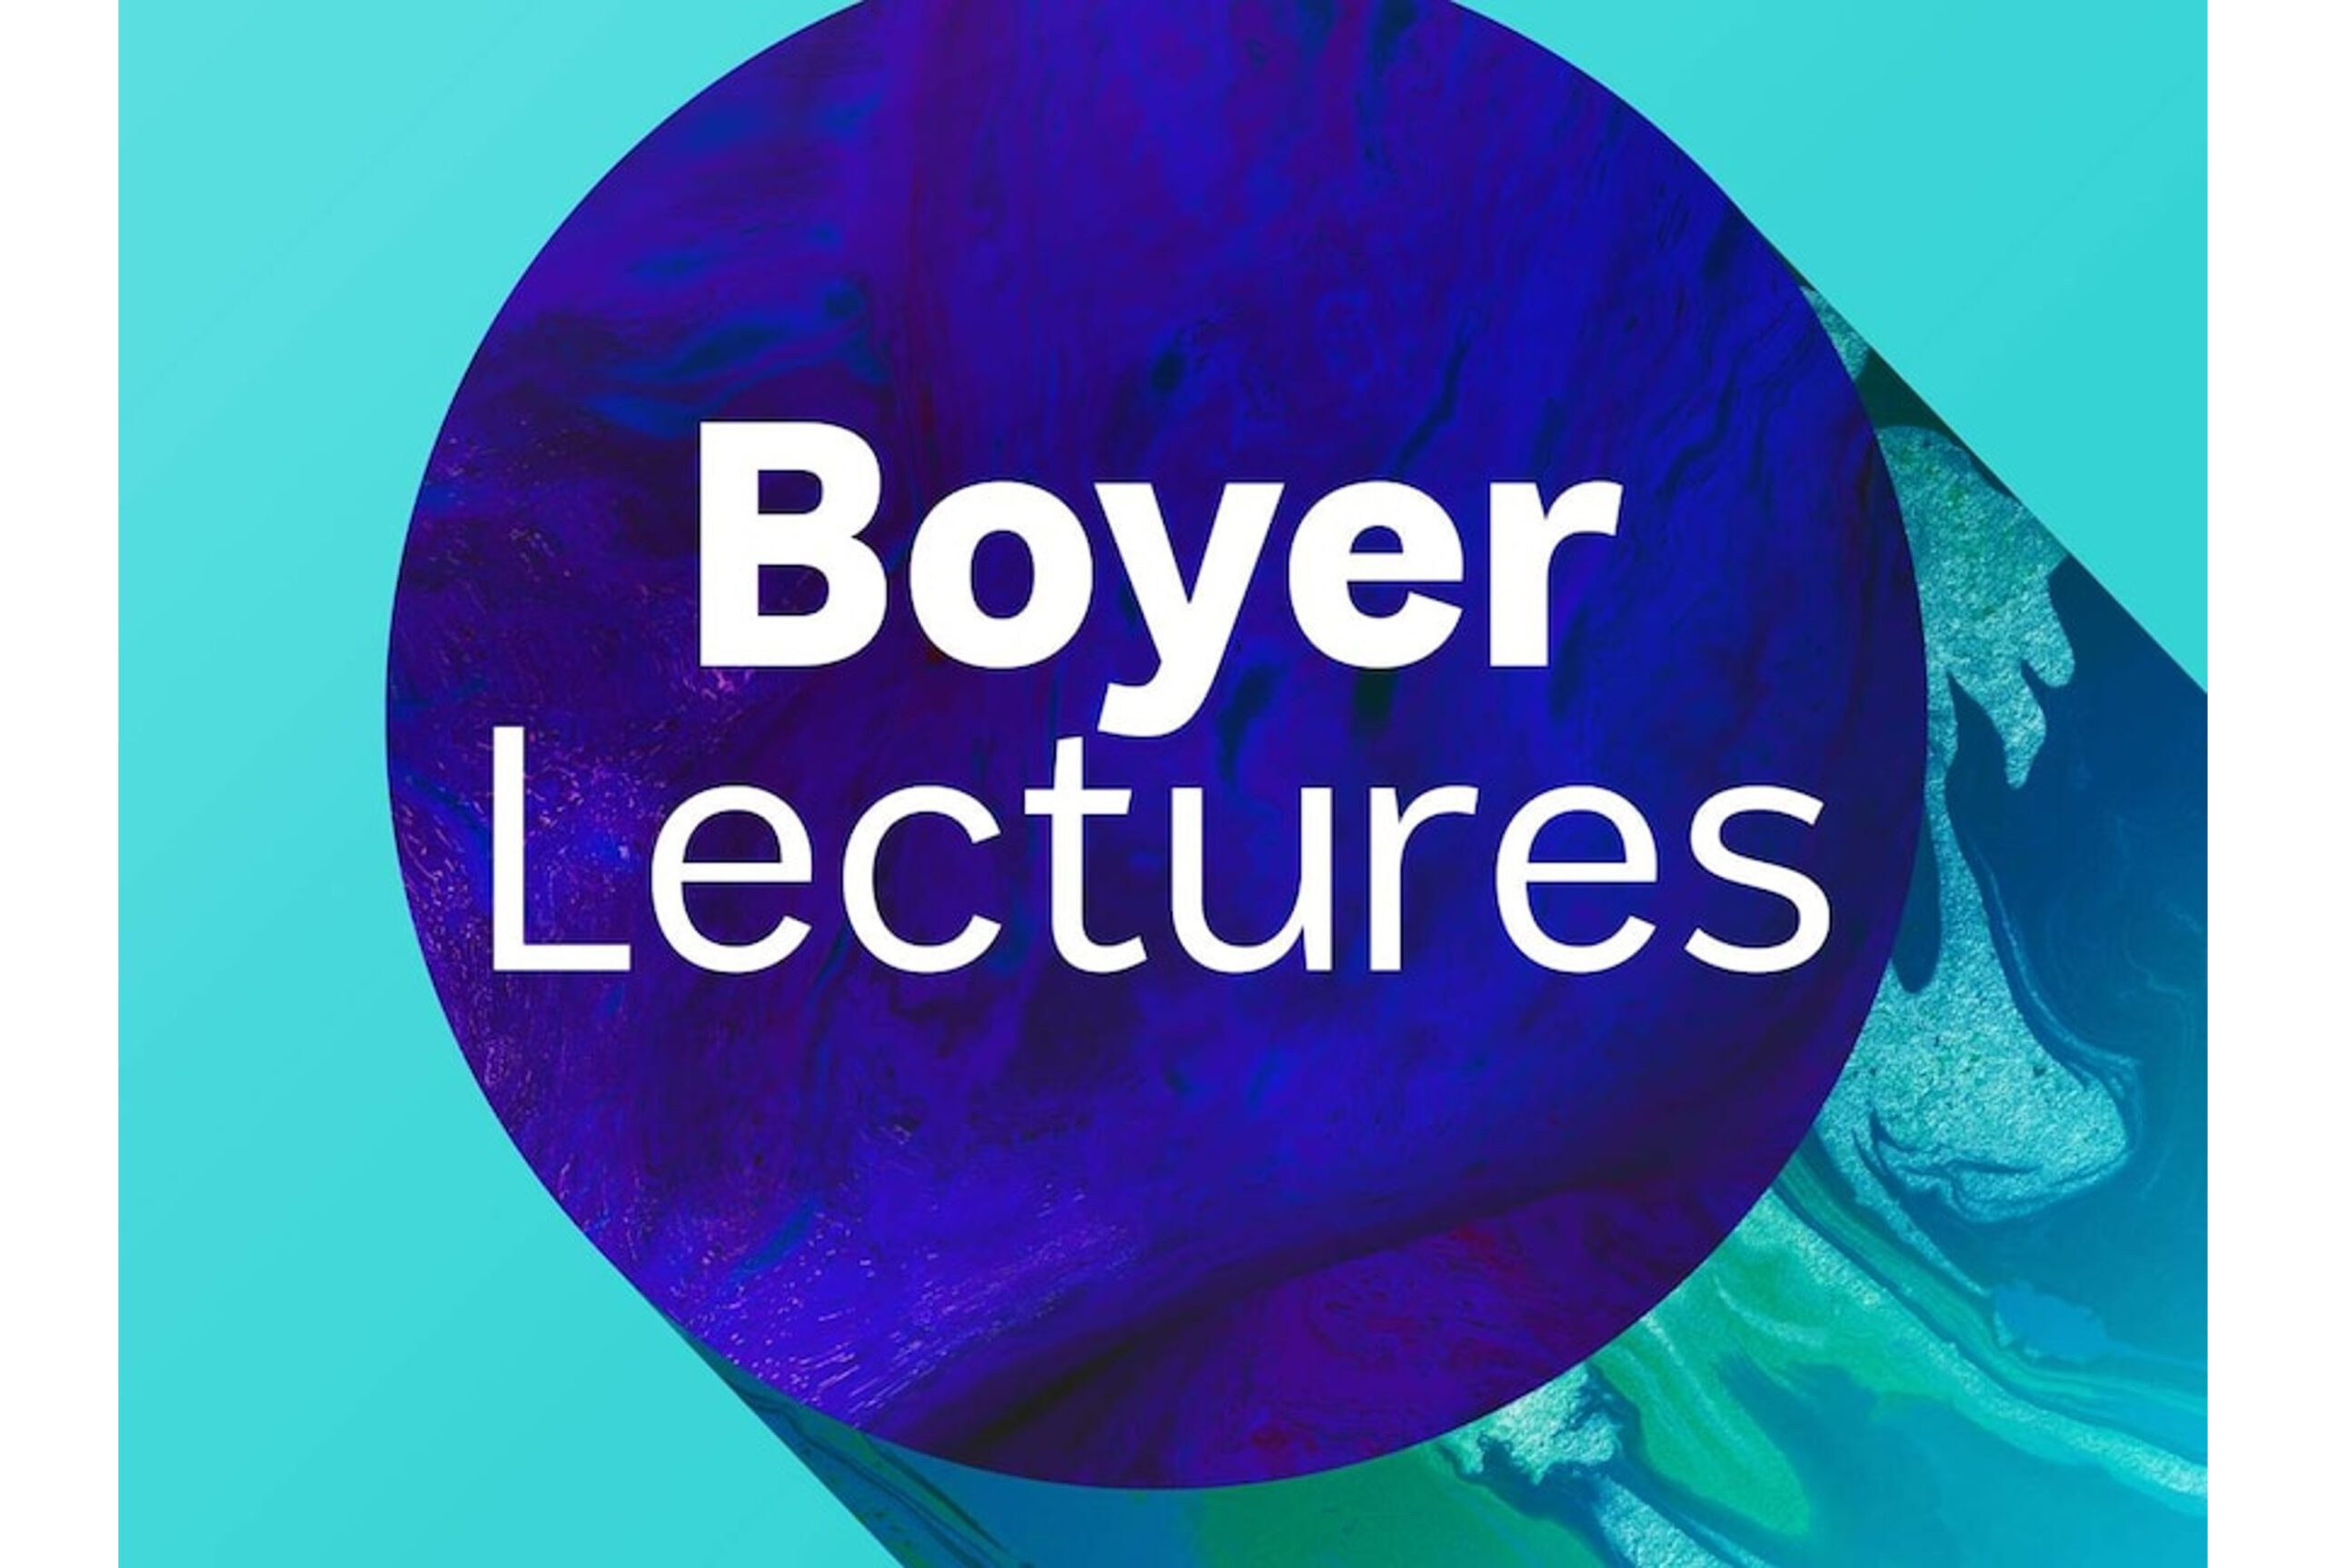 Professor Michelle Simmons explores "The Atomic Revolution" in her first Boyer Lecture